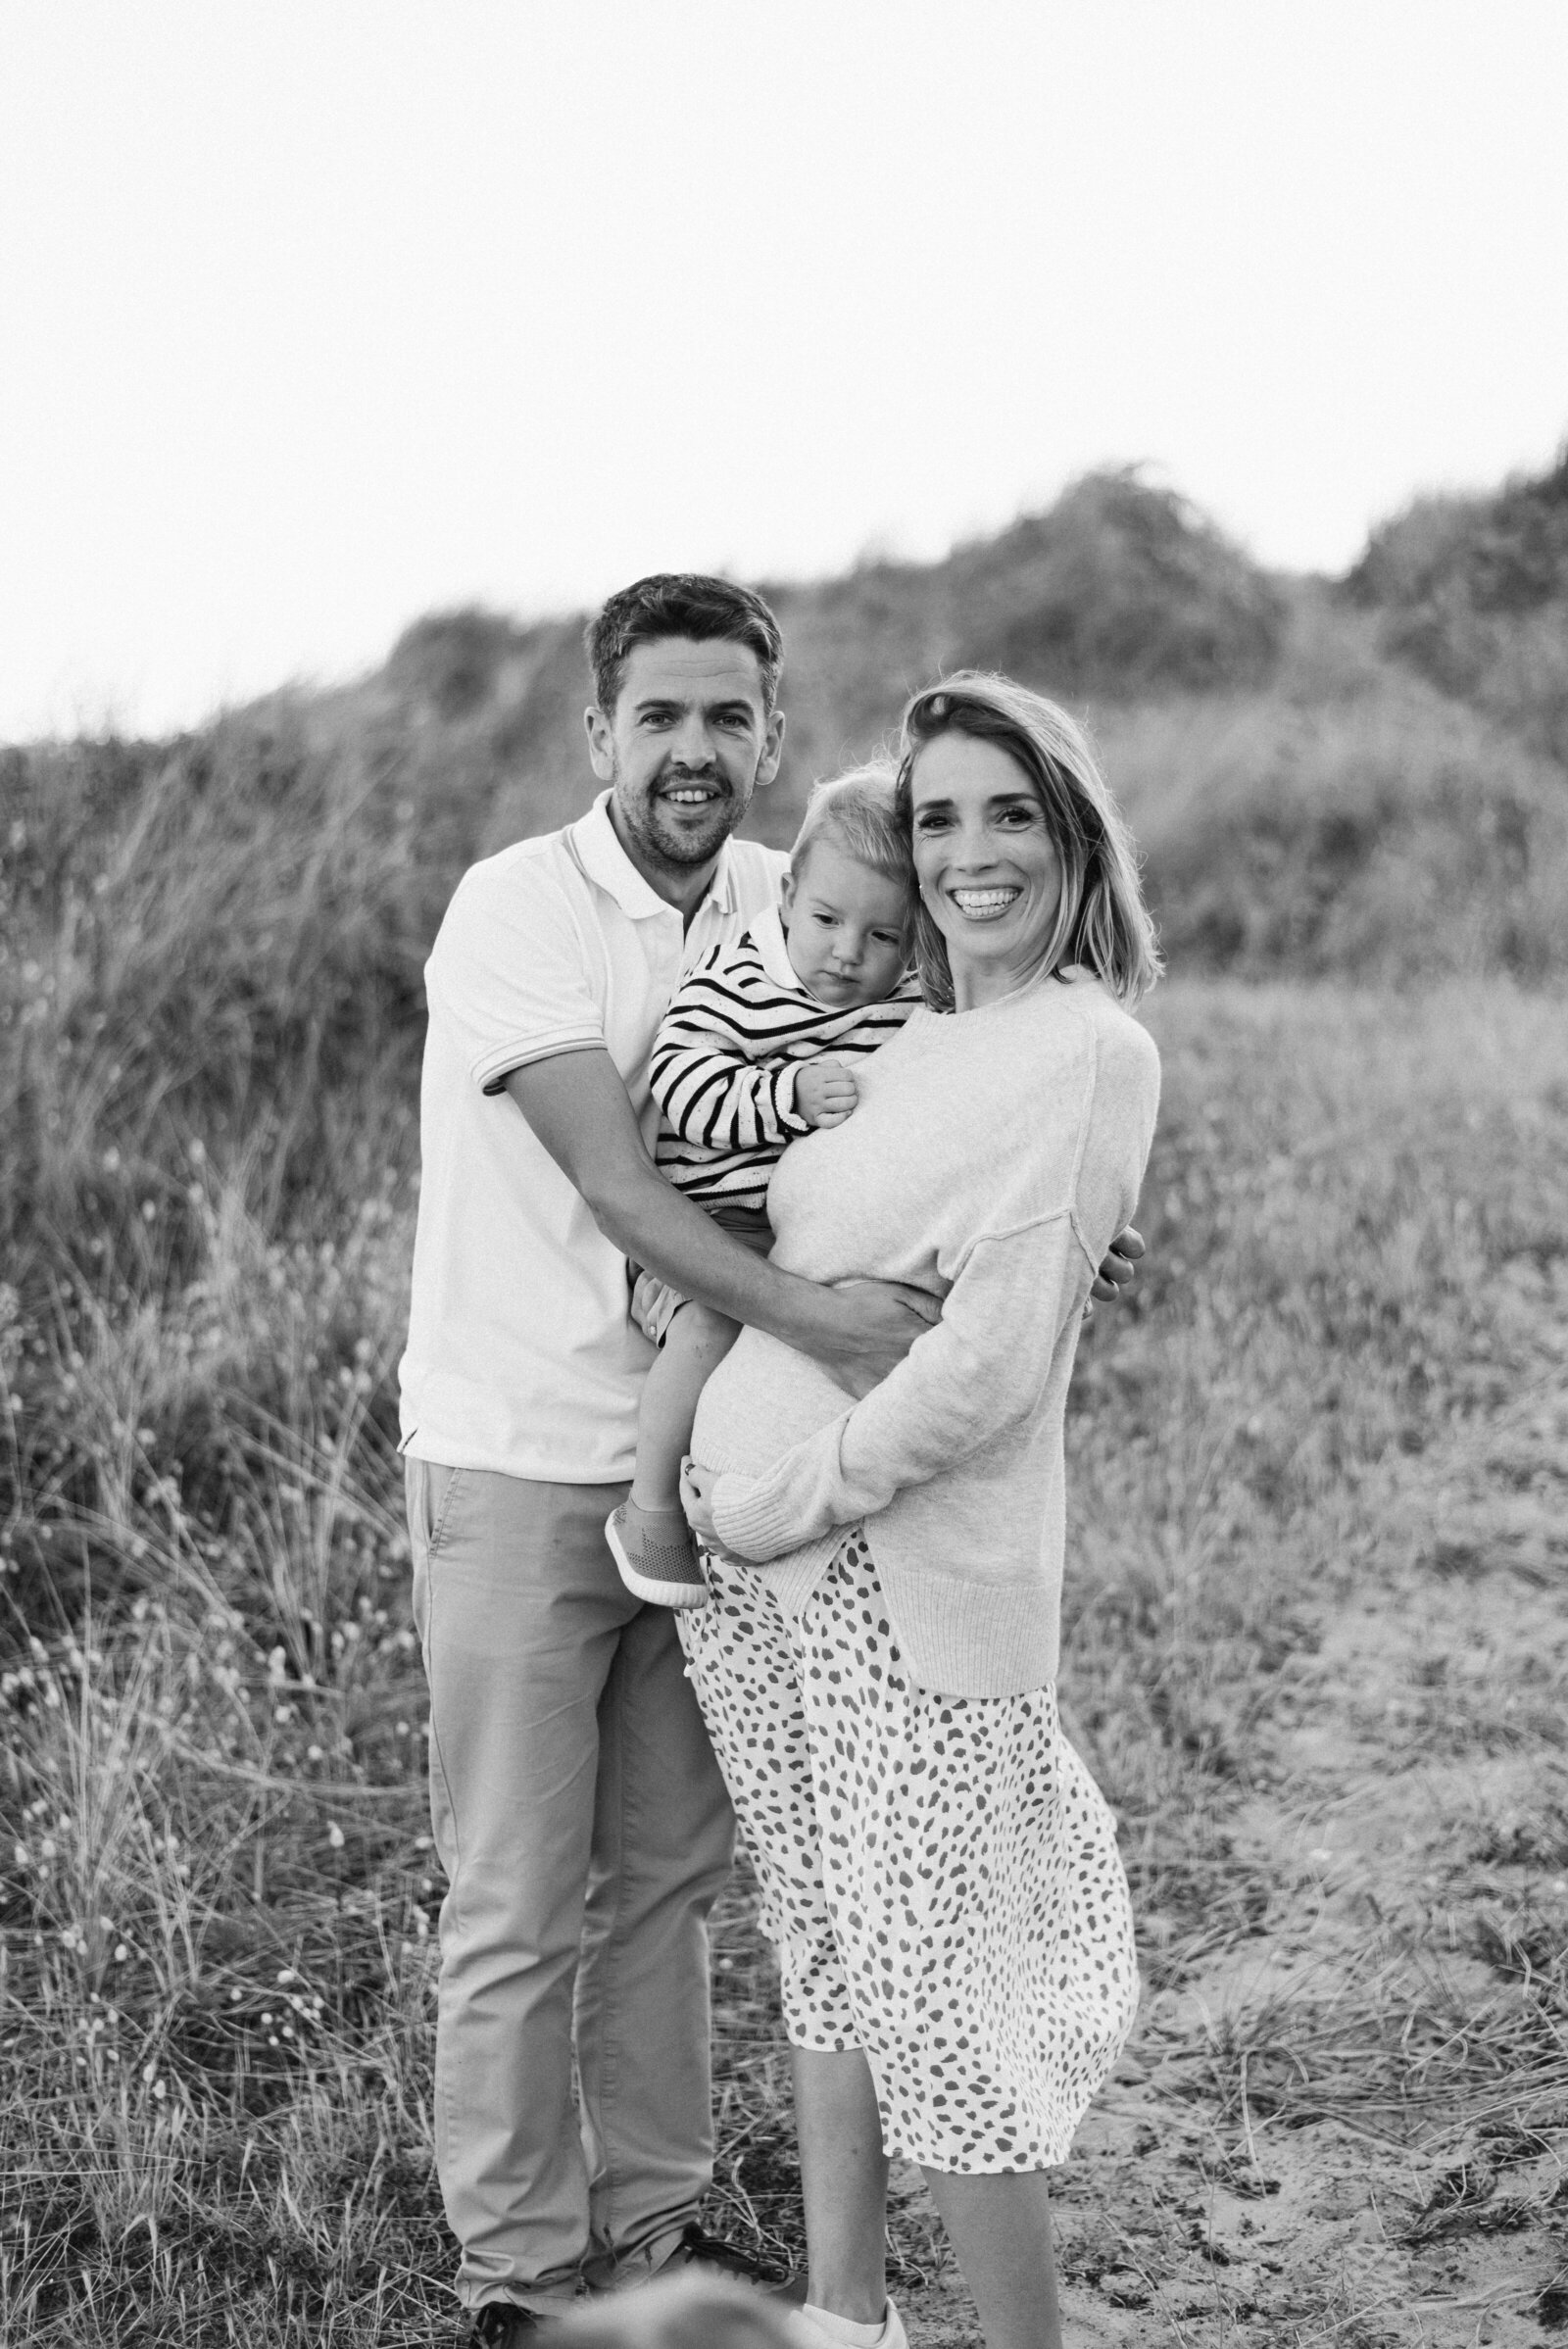 Mum and dad holding their baby during billingshurst family photoshoot